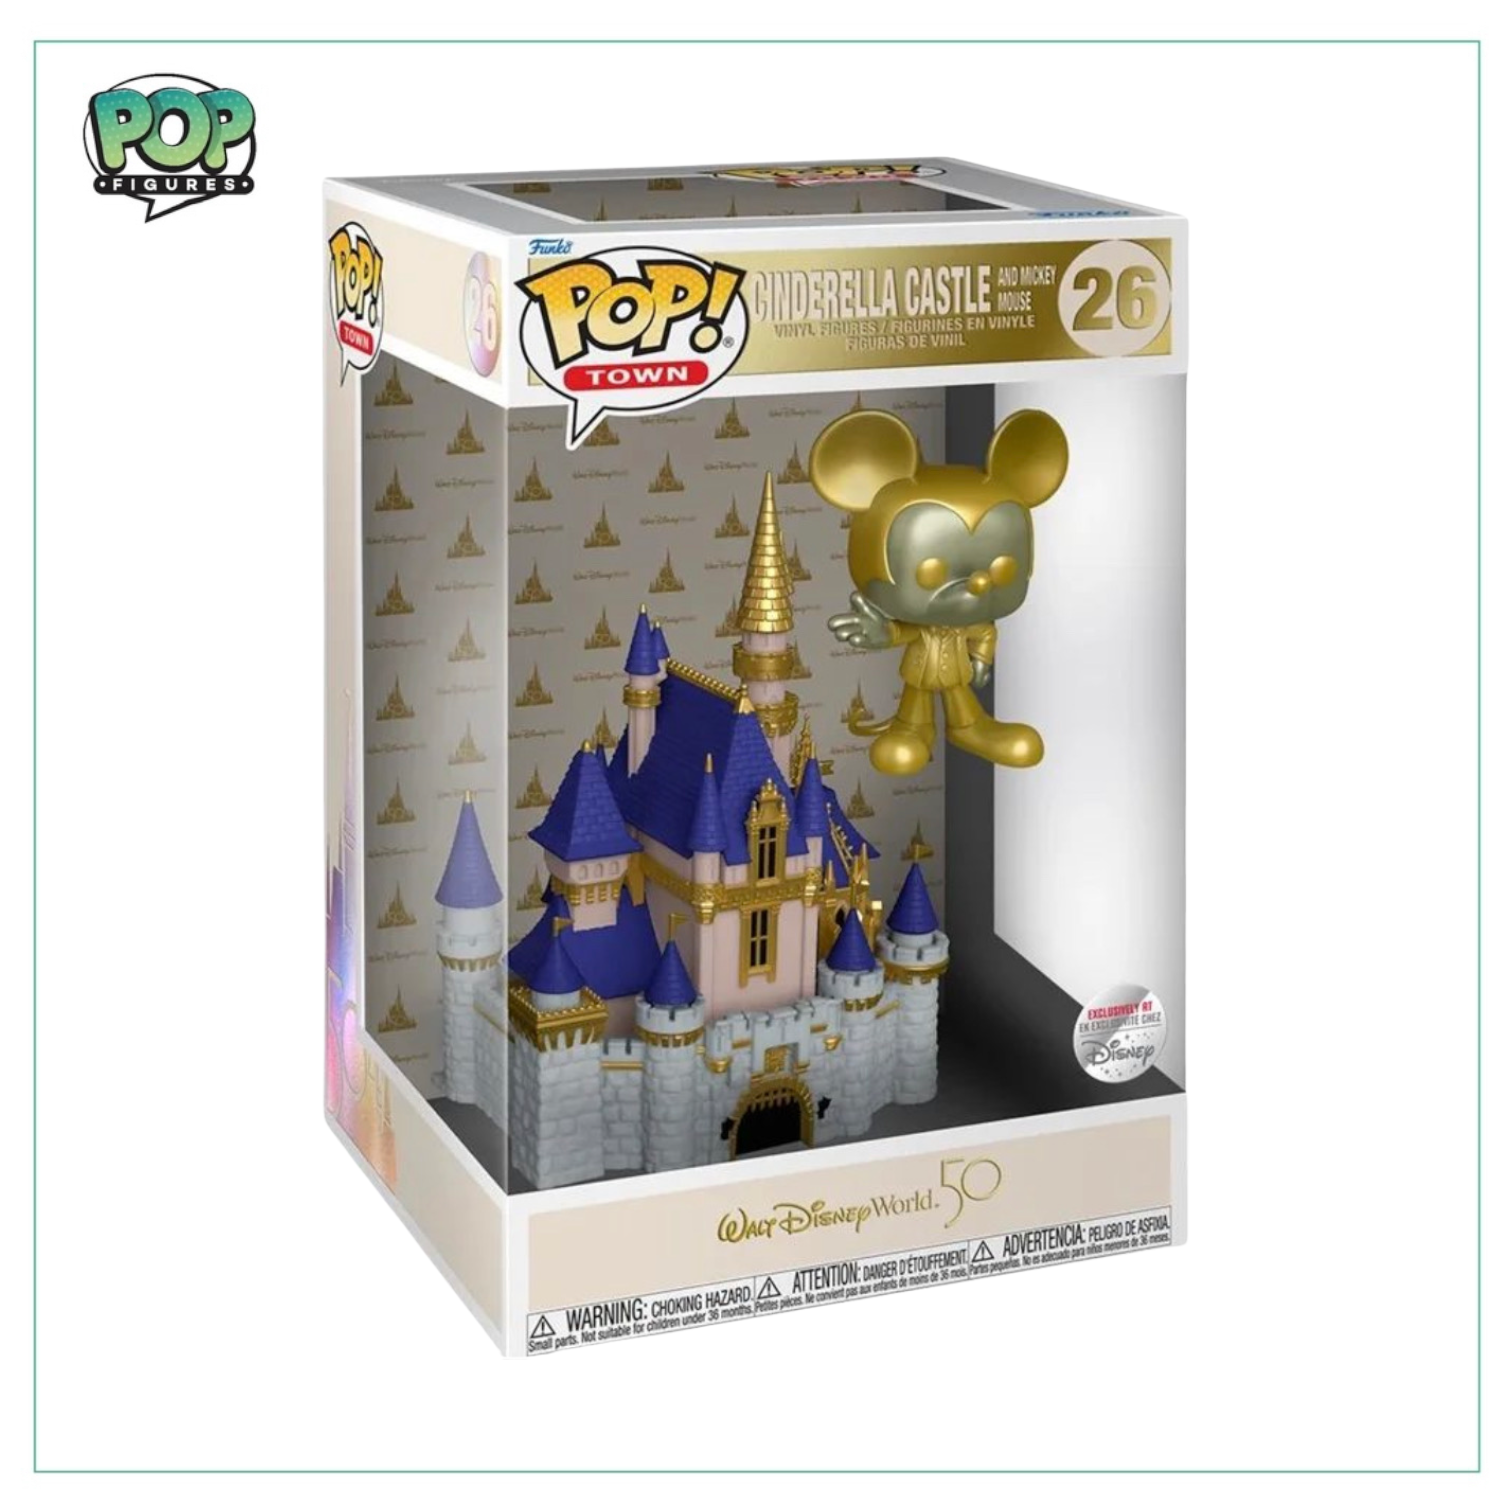 Cinderella Castle and Mickey Mouse (Gold Chrome) #26 Funko Pop! Disney - Disney Parks Exclusive